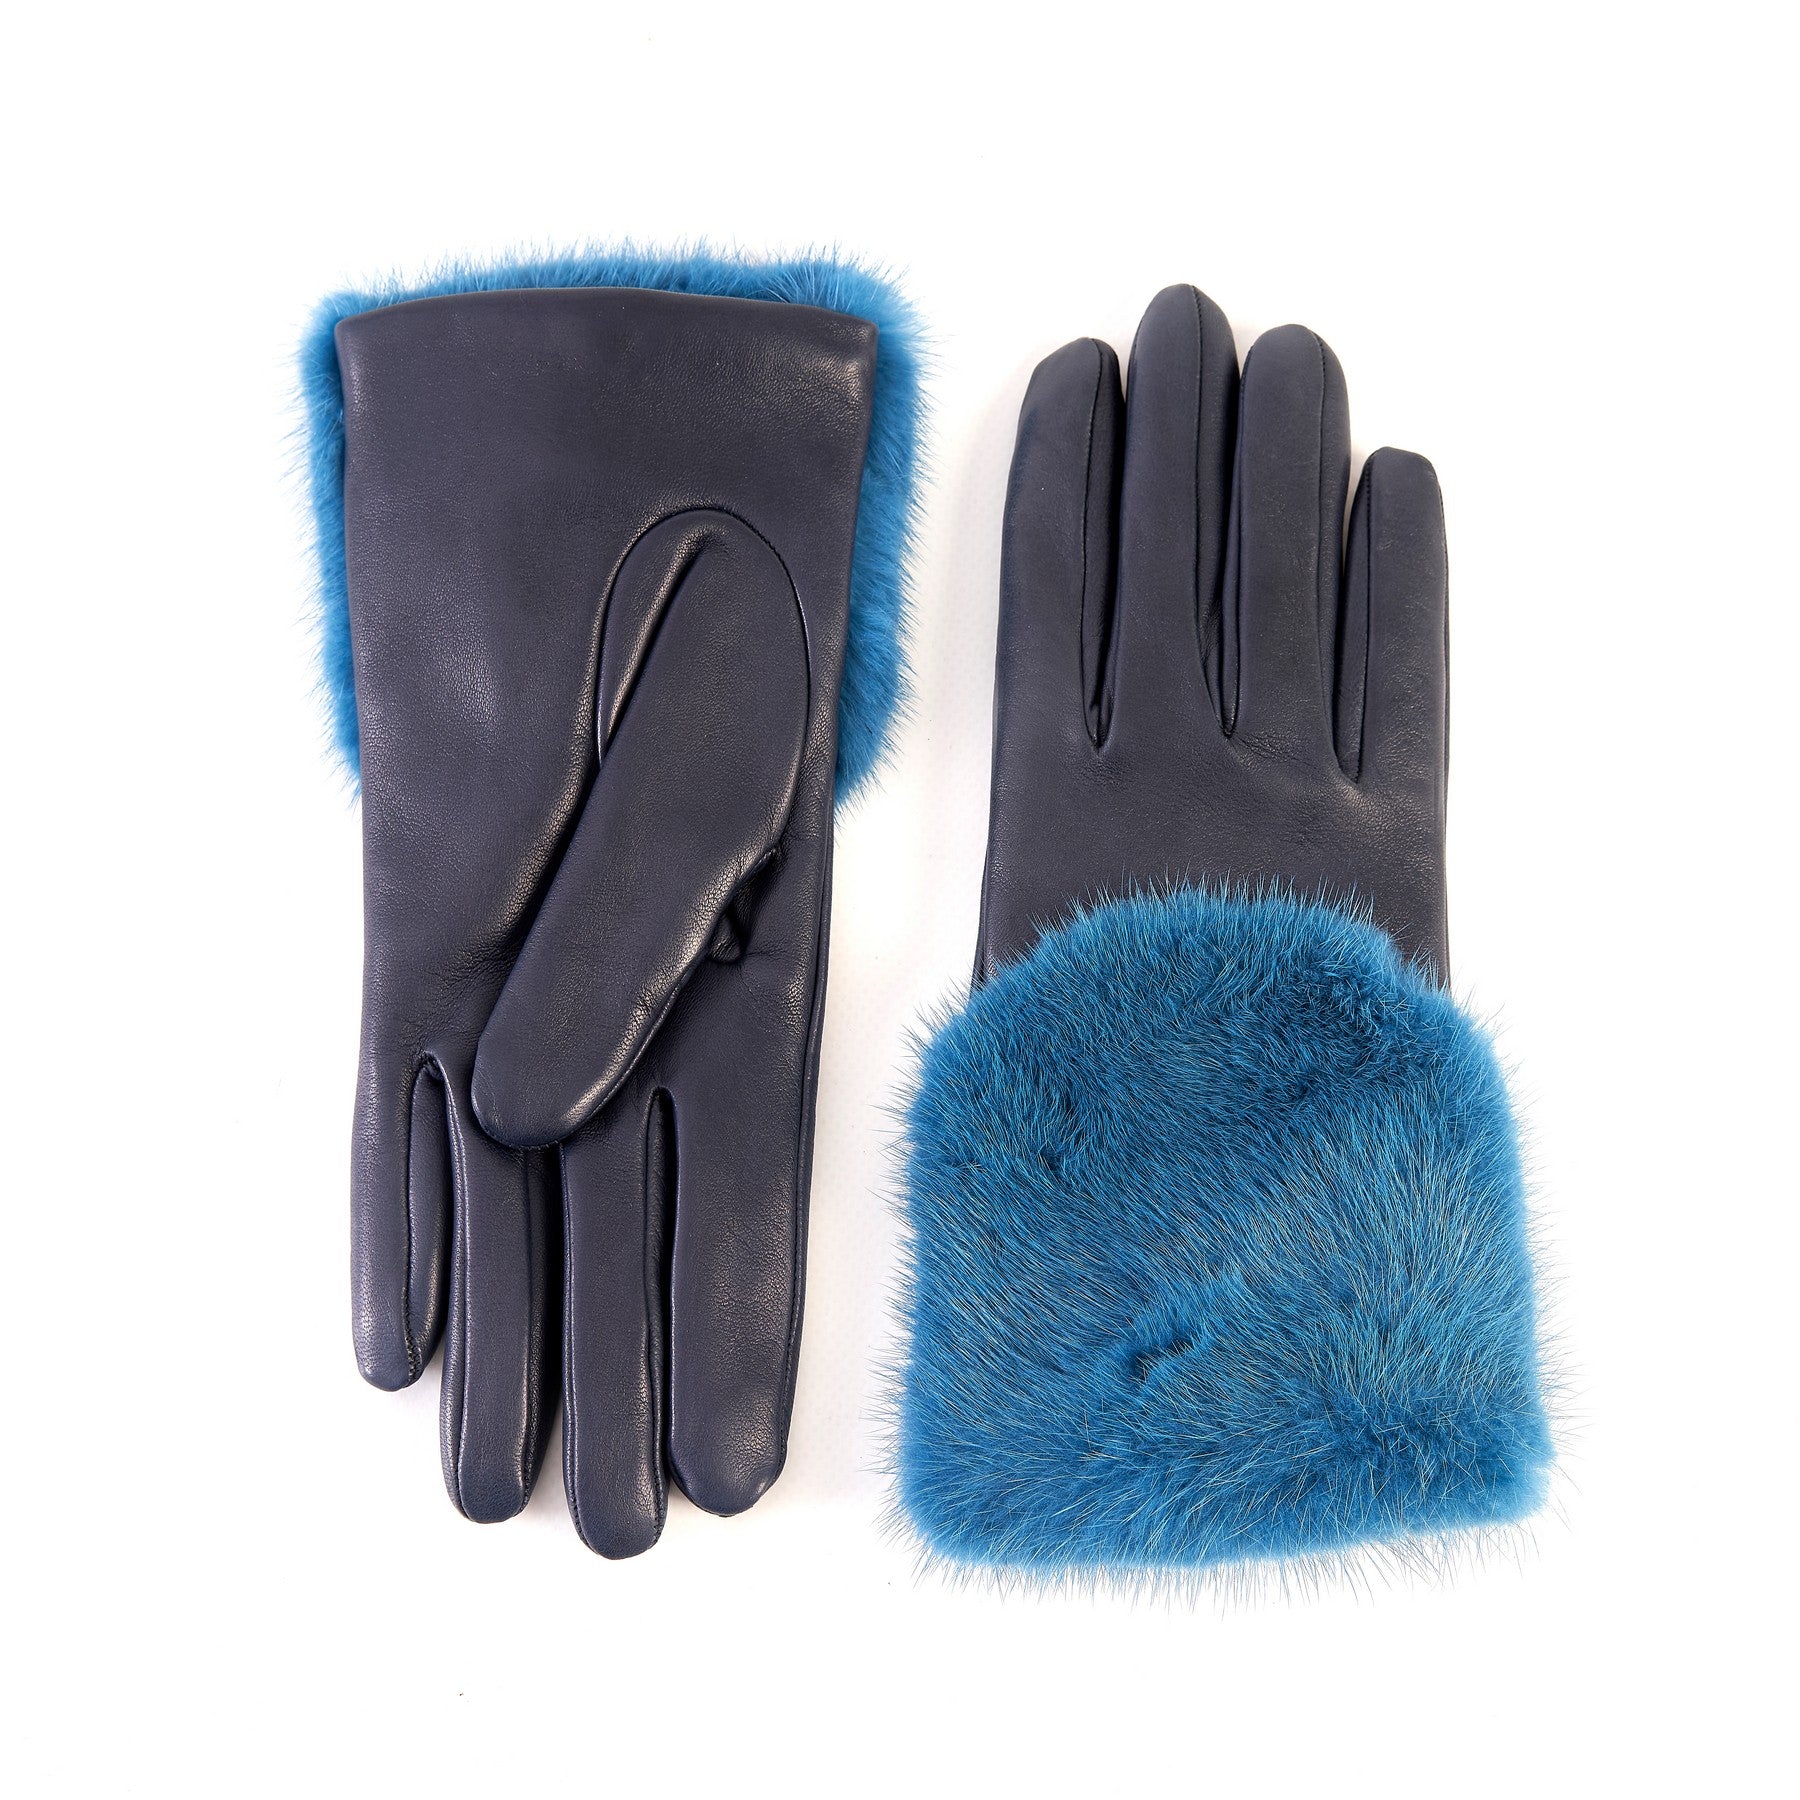 Women's blue marine nappa leather gloves with a wide real fur panel on the top and cashmere lined